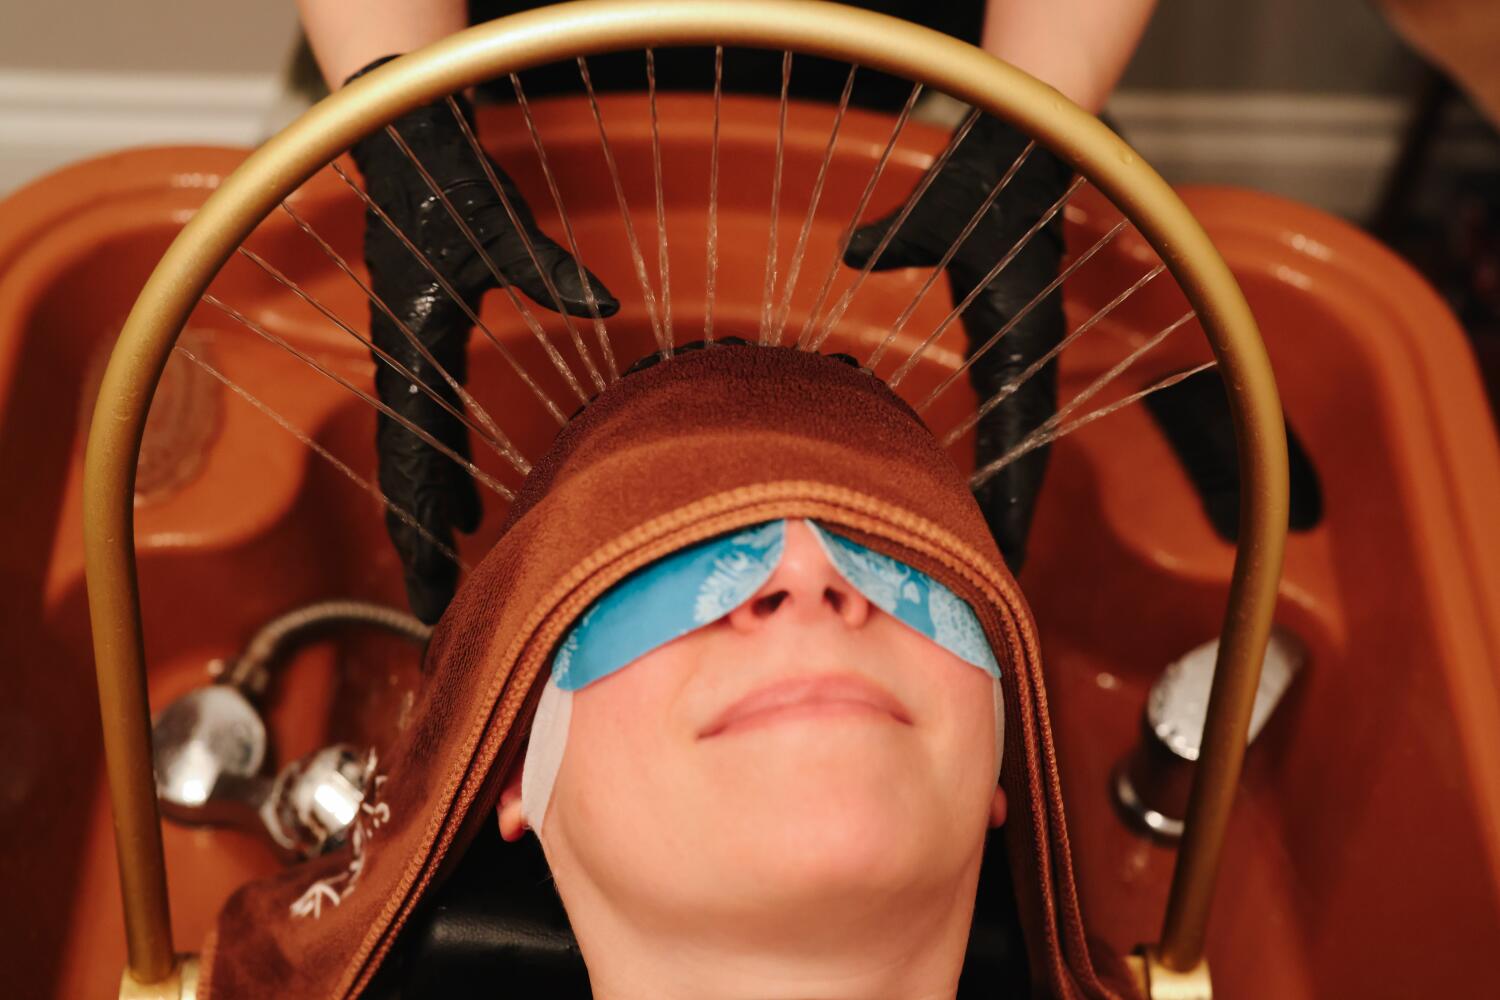 These viral L.A. 'head spas' will show you what's been hiding in your scalp (Ew!)